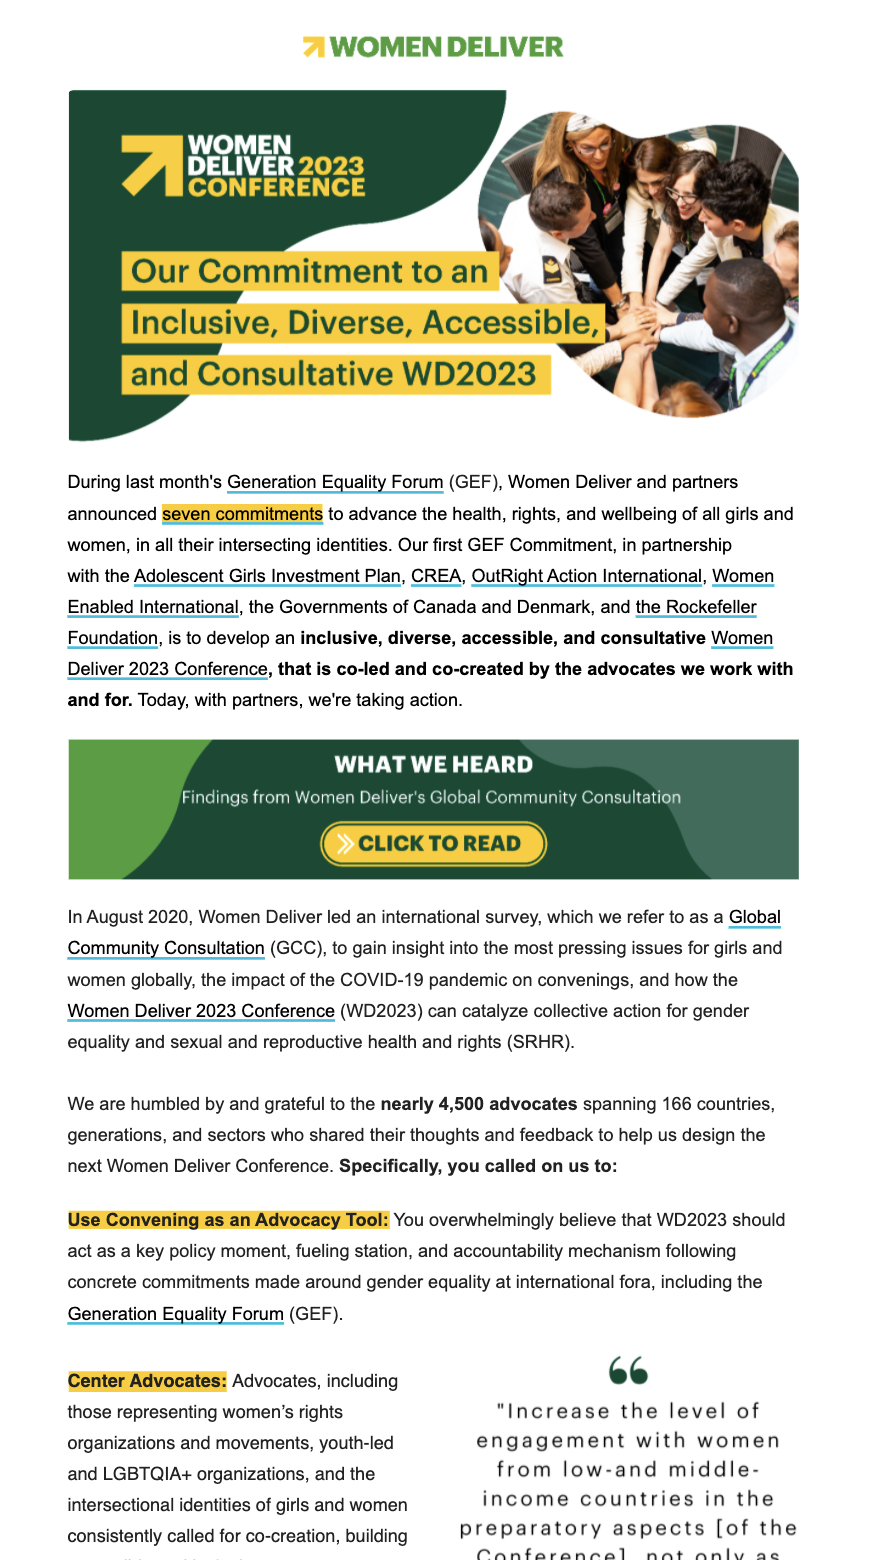 WD2023: Our Commitment